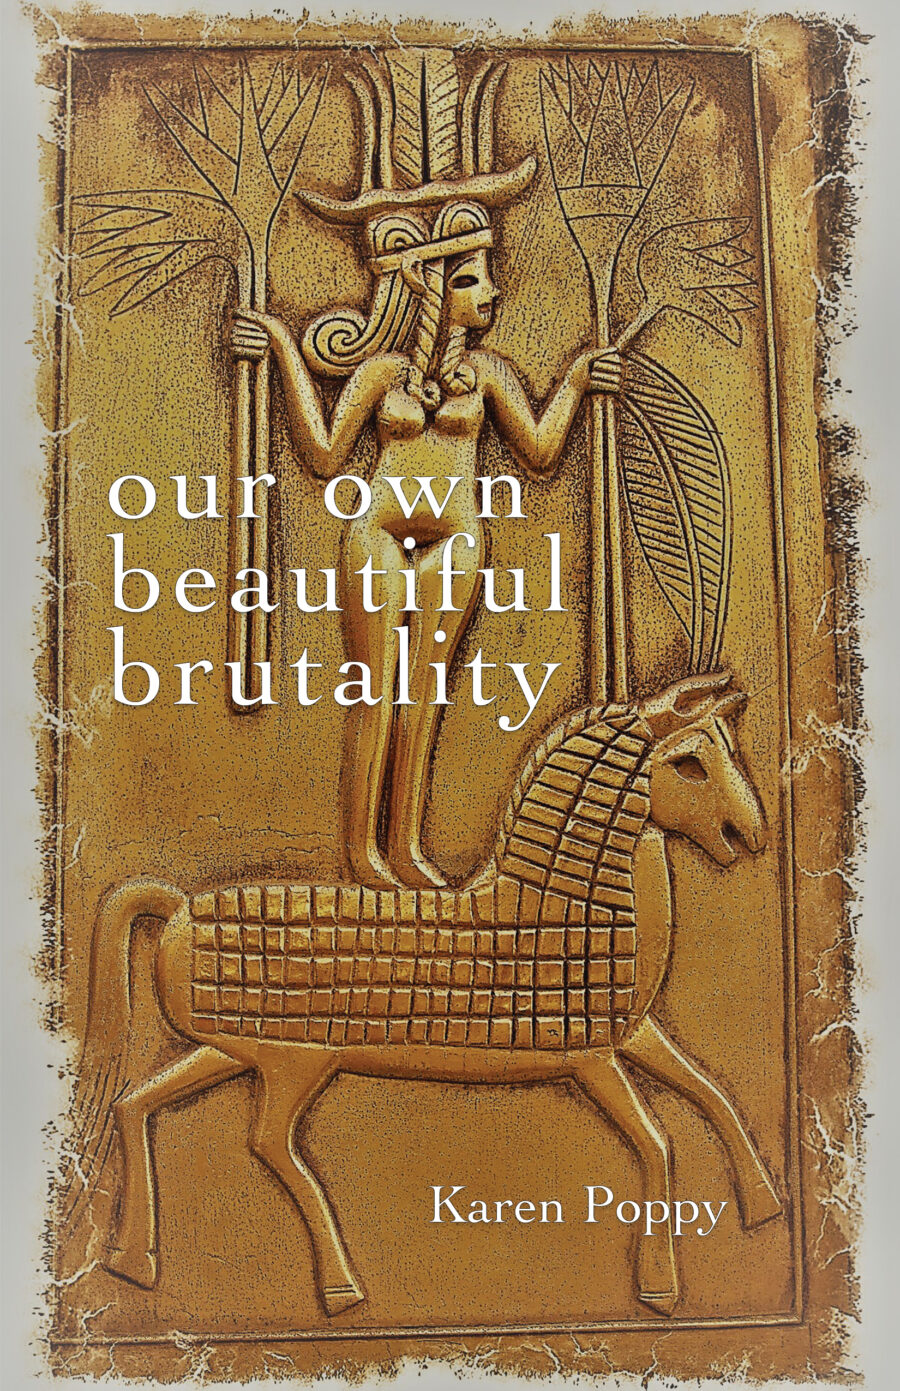 Book cover of our own beautiful brutality by Karen Poppy, a gold colored image of some what like hieroglyphics and image of stylized woman standing on top of a horse